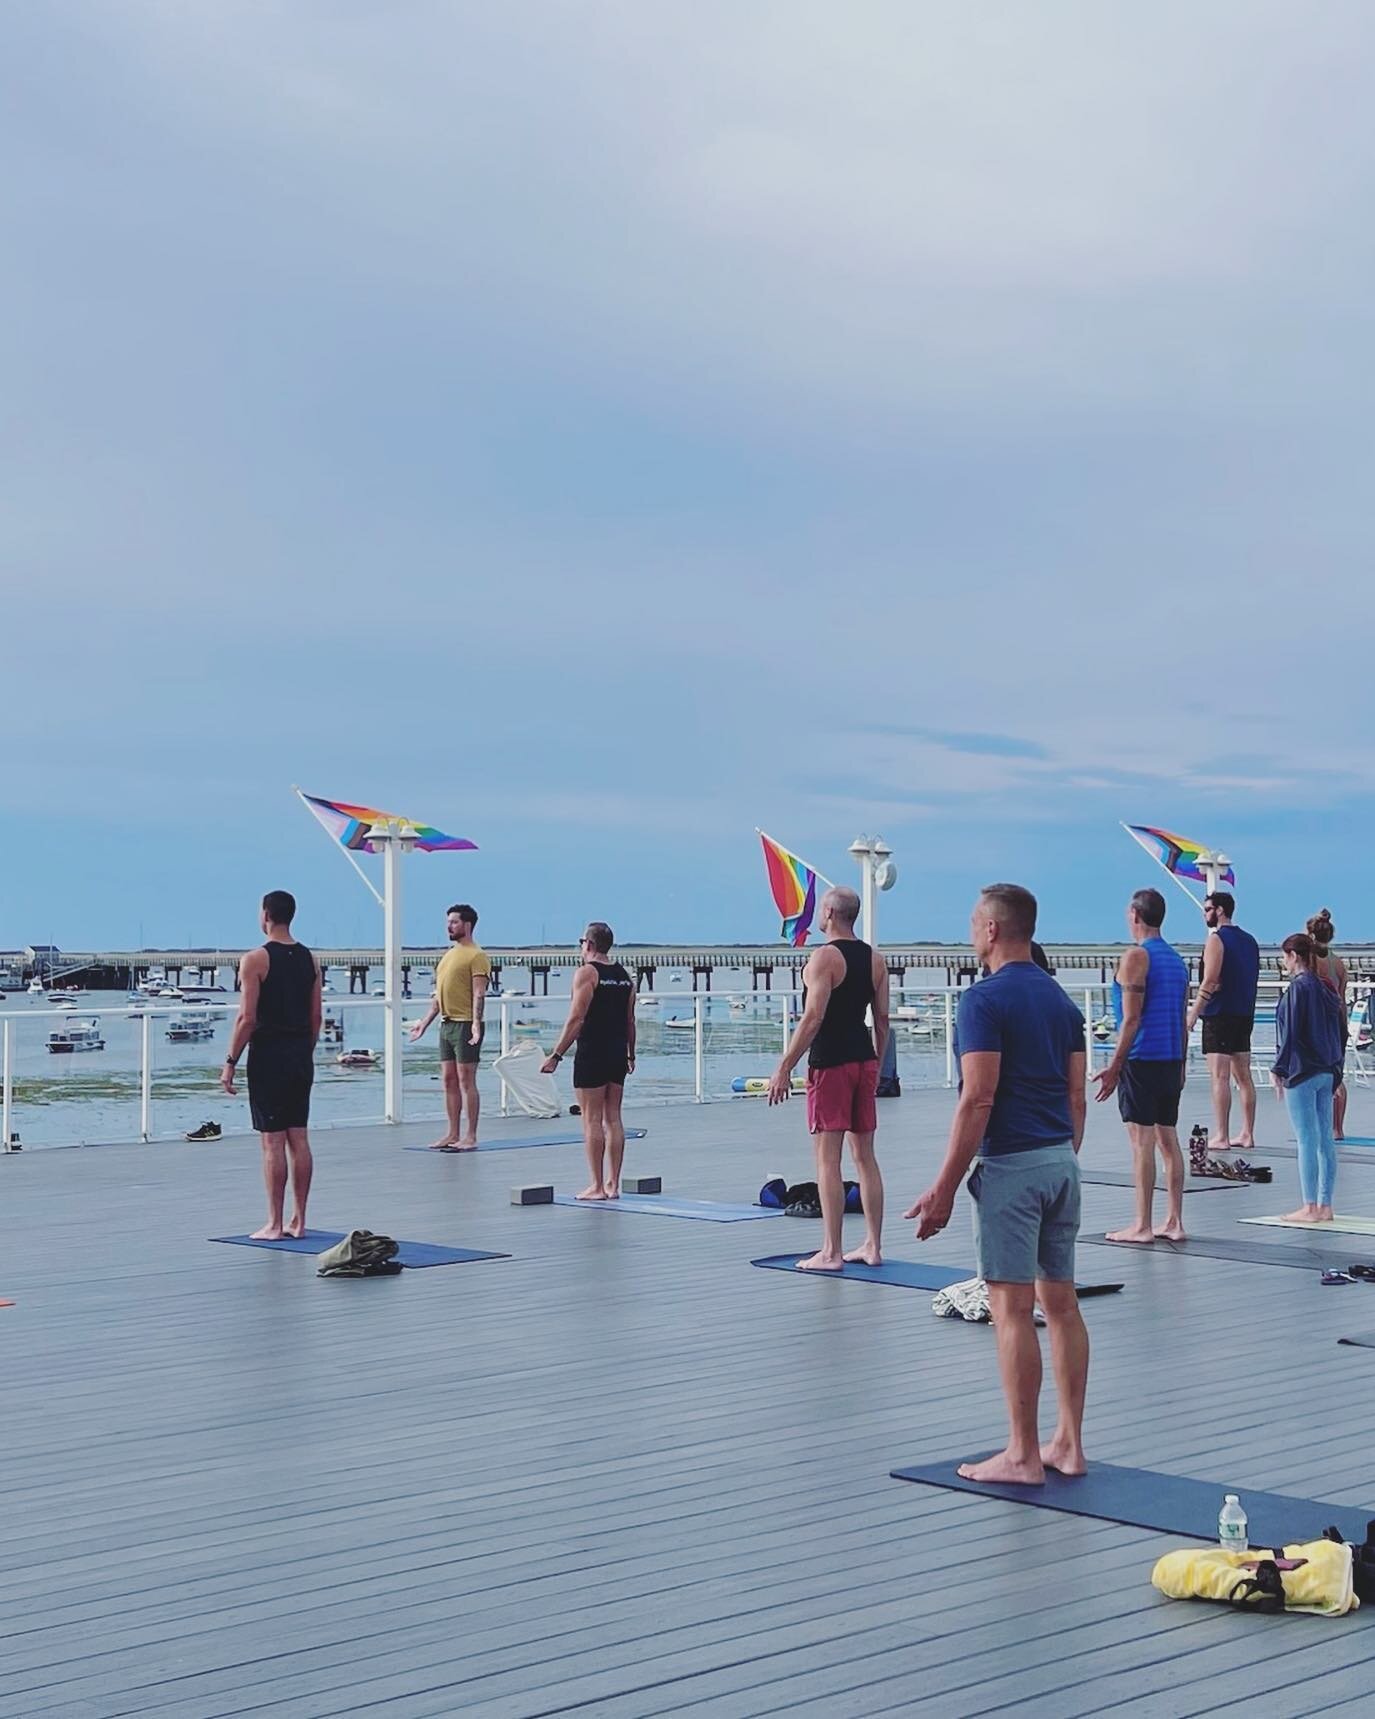 Boatslip classes are 7 days a week all summer!

Rise and flow with the sun each morning at 7:15am on the massive Boatslip deck with an unbearable view of Ptown&rsquo;s harbor.

In case of rain, we&rsquo;ll hold class under the big tent. Always check 